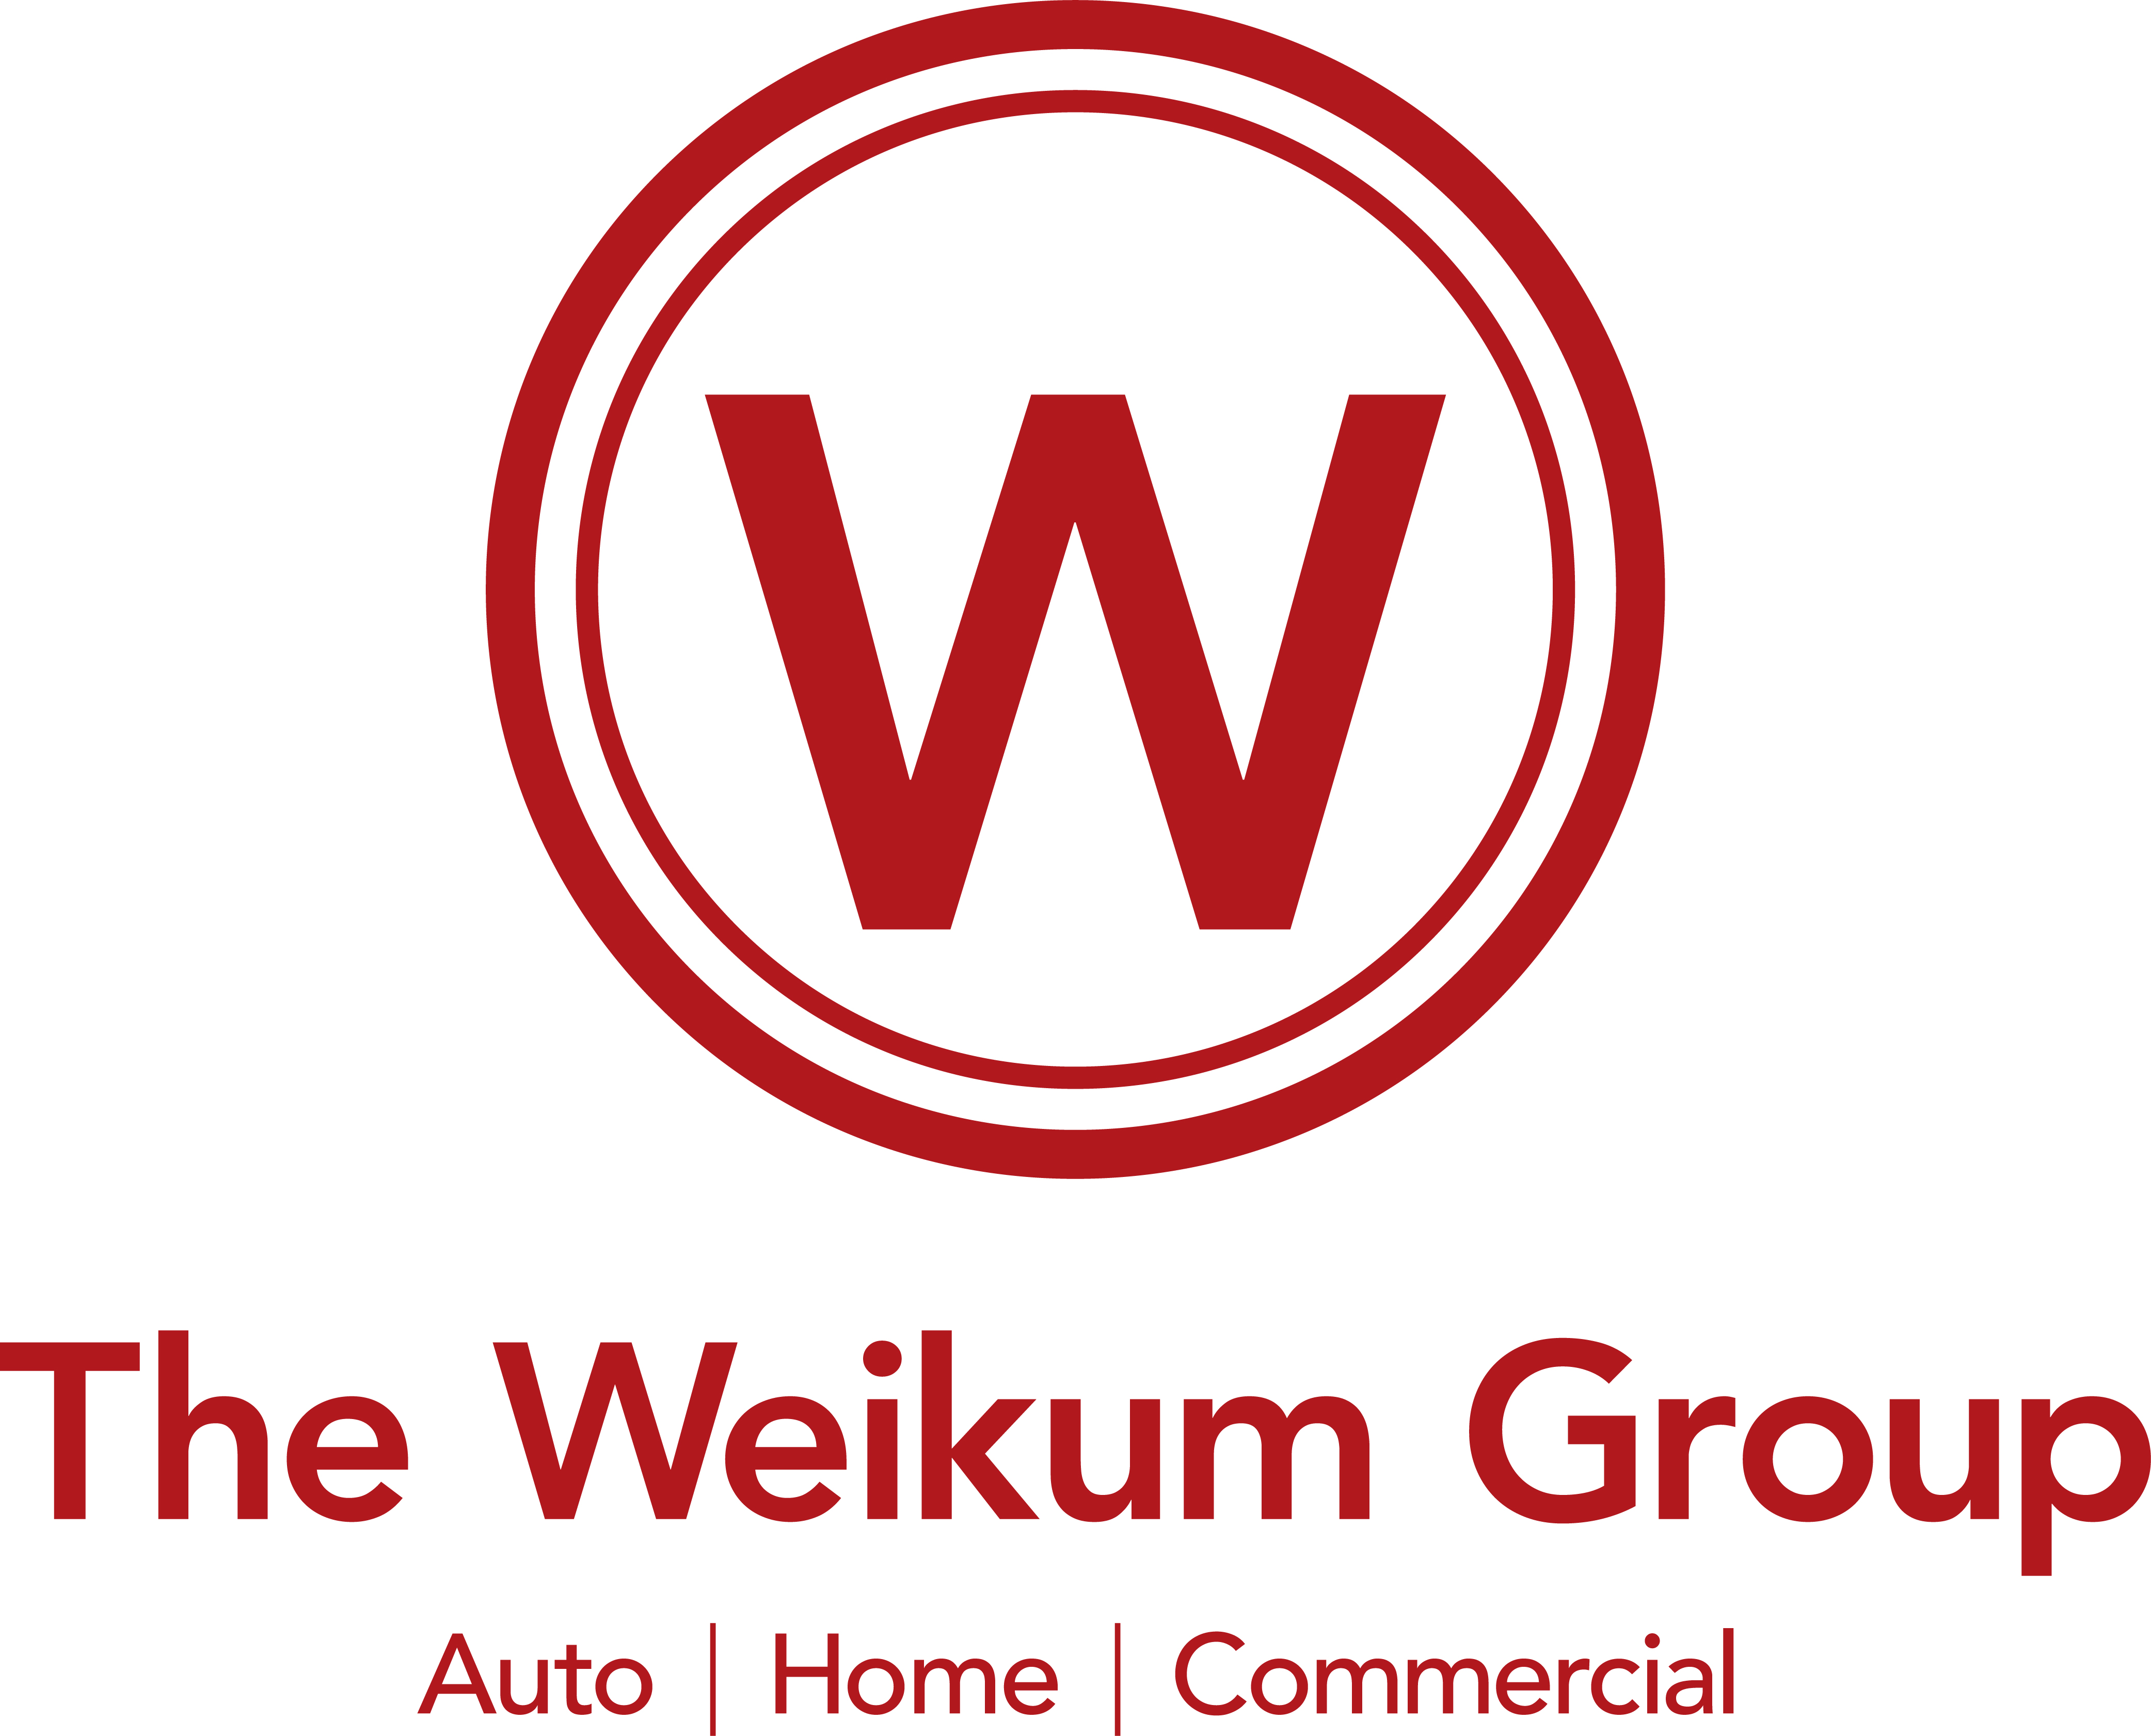 The Weikum Group